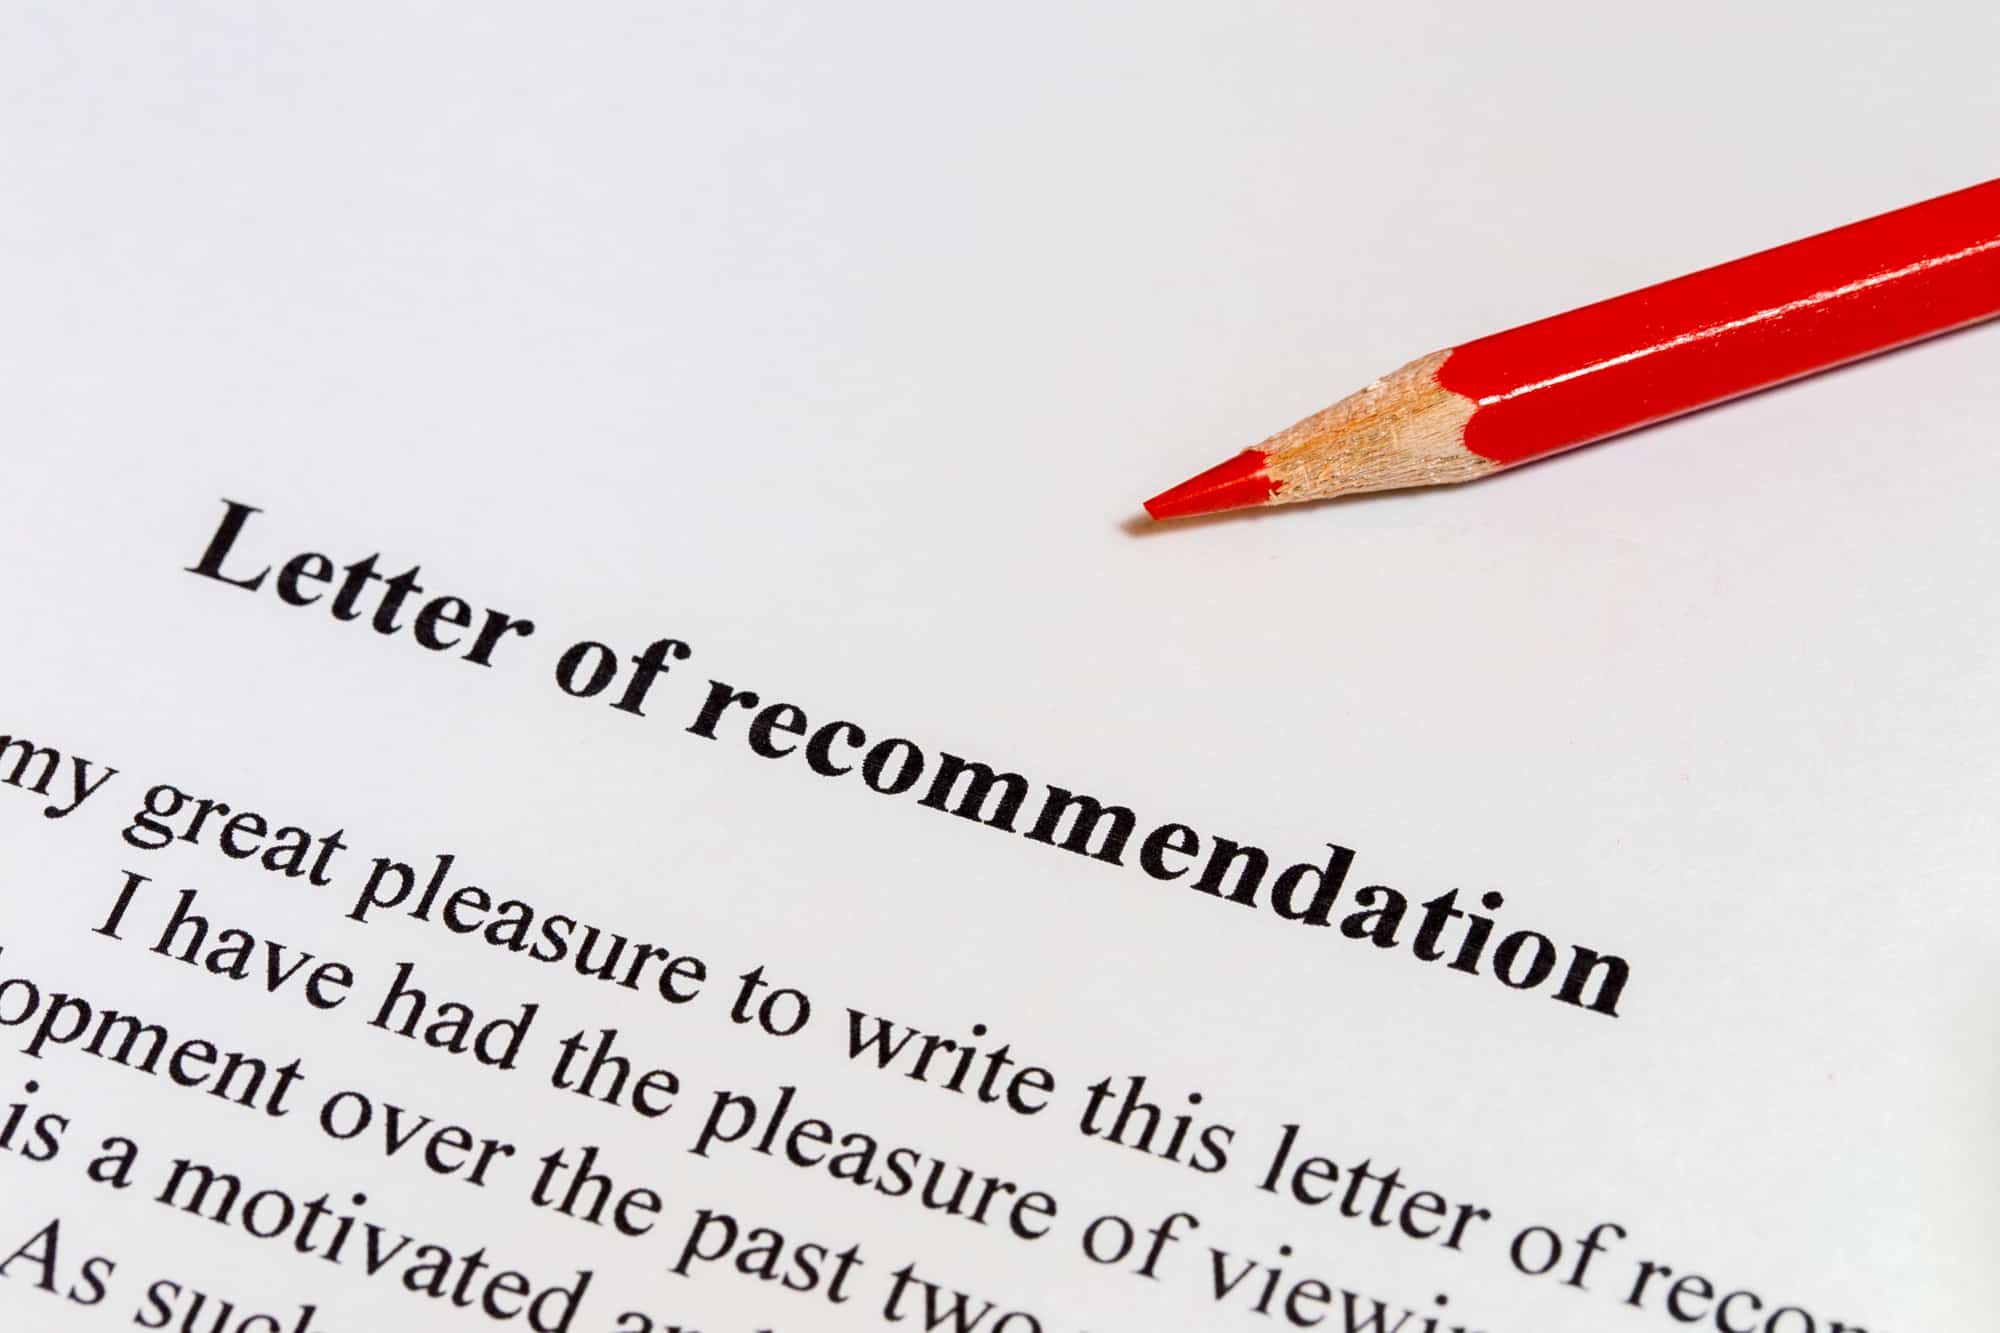 Sample Recommendation Letter For An Average Student